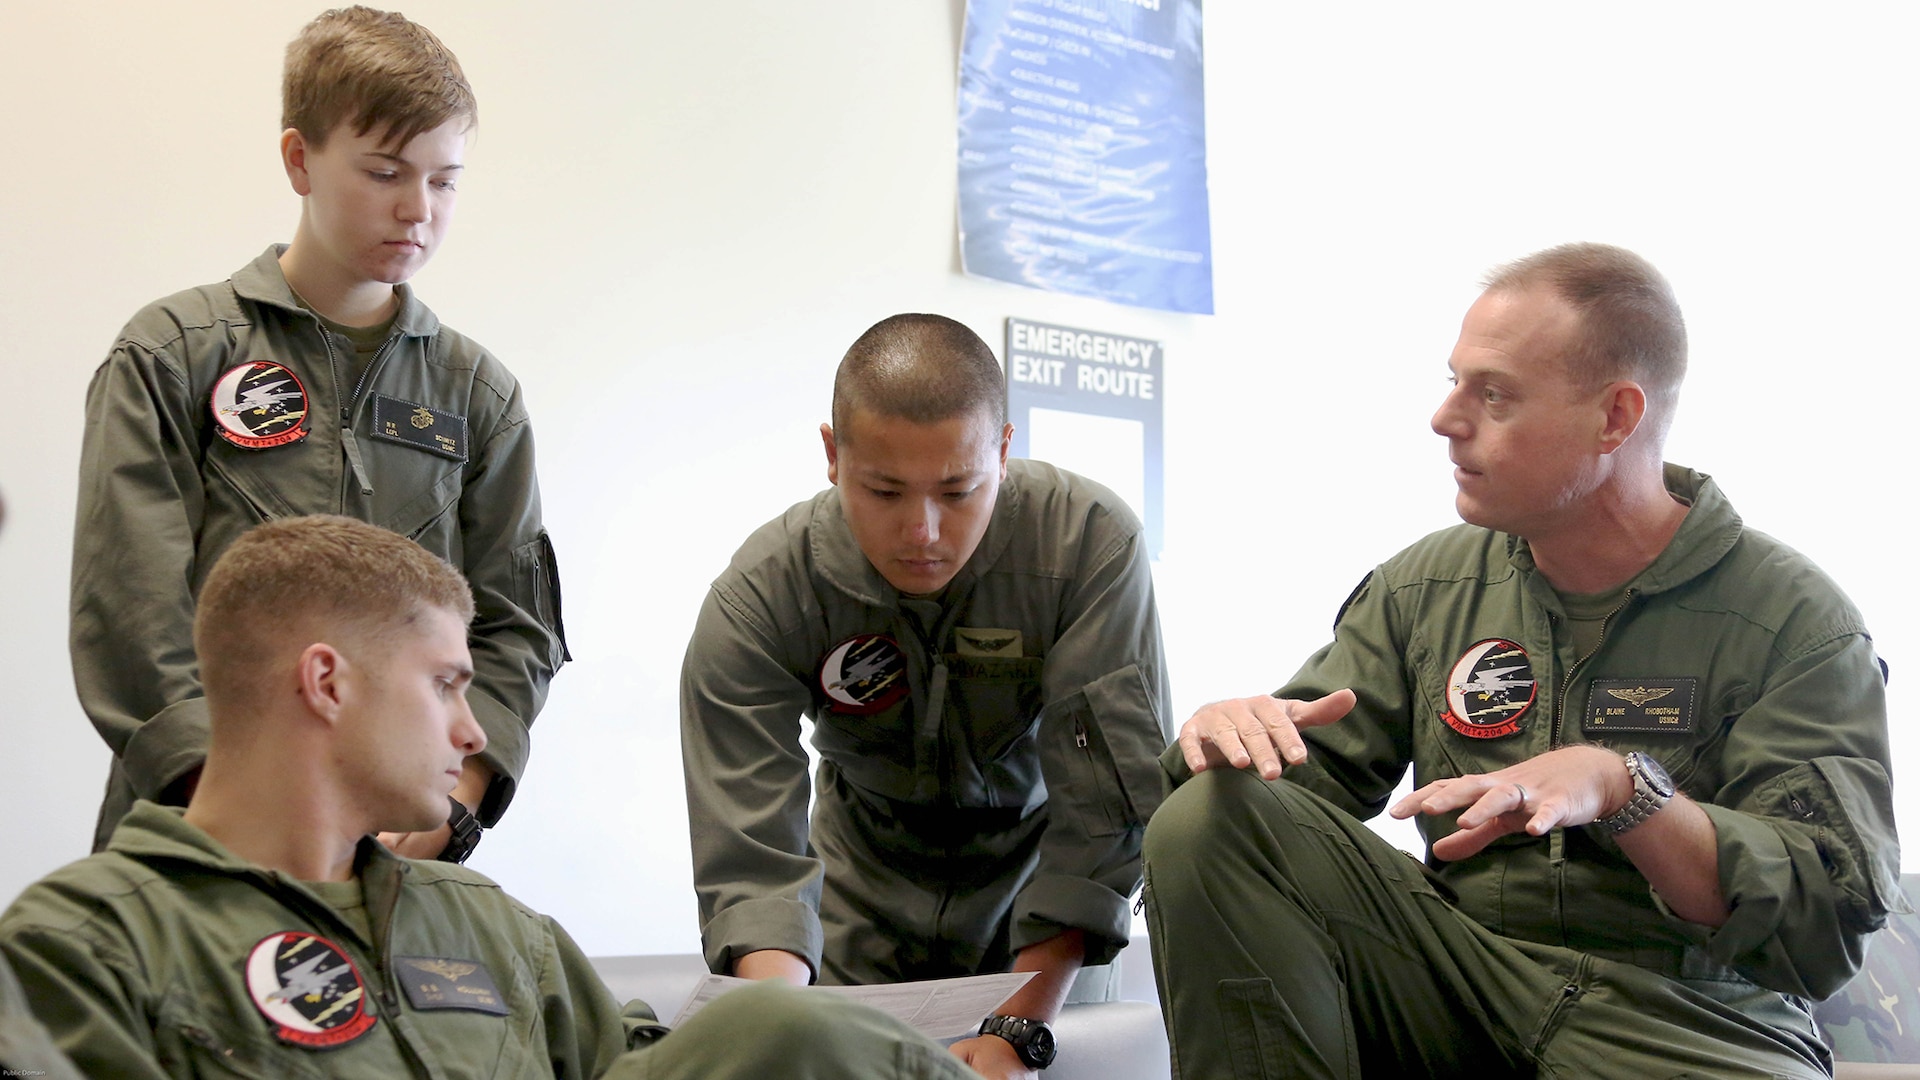 Sgt. 1st Class Midsru Miyazaki, center, coordinates with Marines assigned to Marine Medium Tiltrotor Squadron 204 during a pre-flight brief at Marine Corps Air Station New River, N.C., April 7, 2017. Miyazaki has been training to become the first Japanese MV-22 Osprey crew chief. VMMT-204’s mission is to provide training to Osprey pilots, crew chiefs and units in the use and maintenance of the MV-22 Osprey tiltrotor aircraft. VMMT-204 is assigned to Marine Aircraft Group 26, 2nd Marine Aircraft Wing.